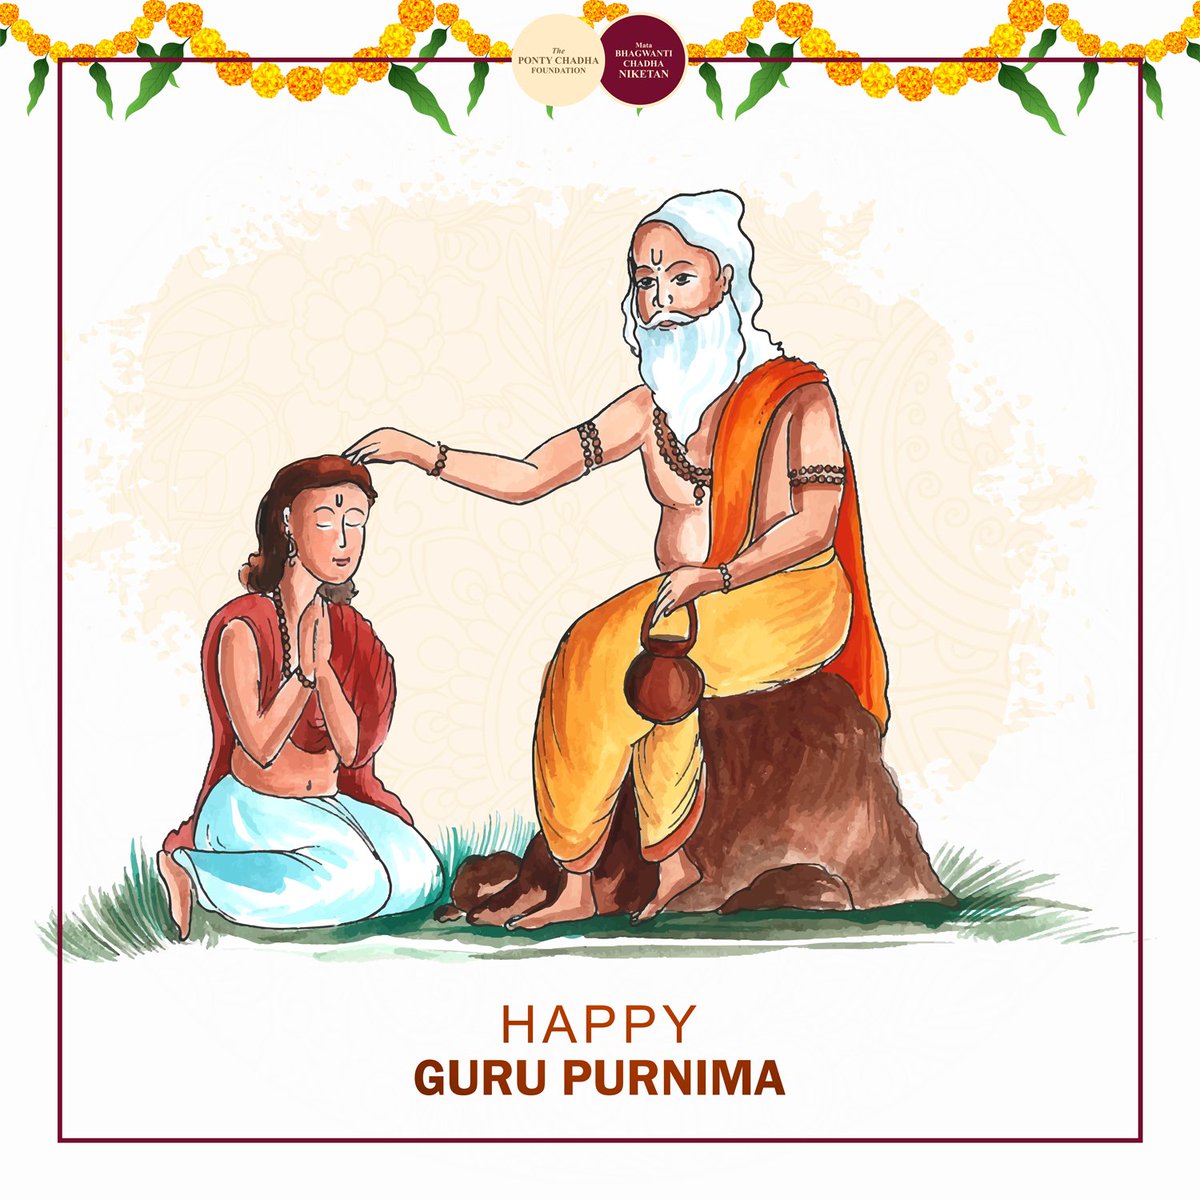 #gurupurnima PCF Family wishing you all a meaningful Guru Purnima filled with love, respect, and gratitude for the teachers who have touched your life and made a difference.